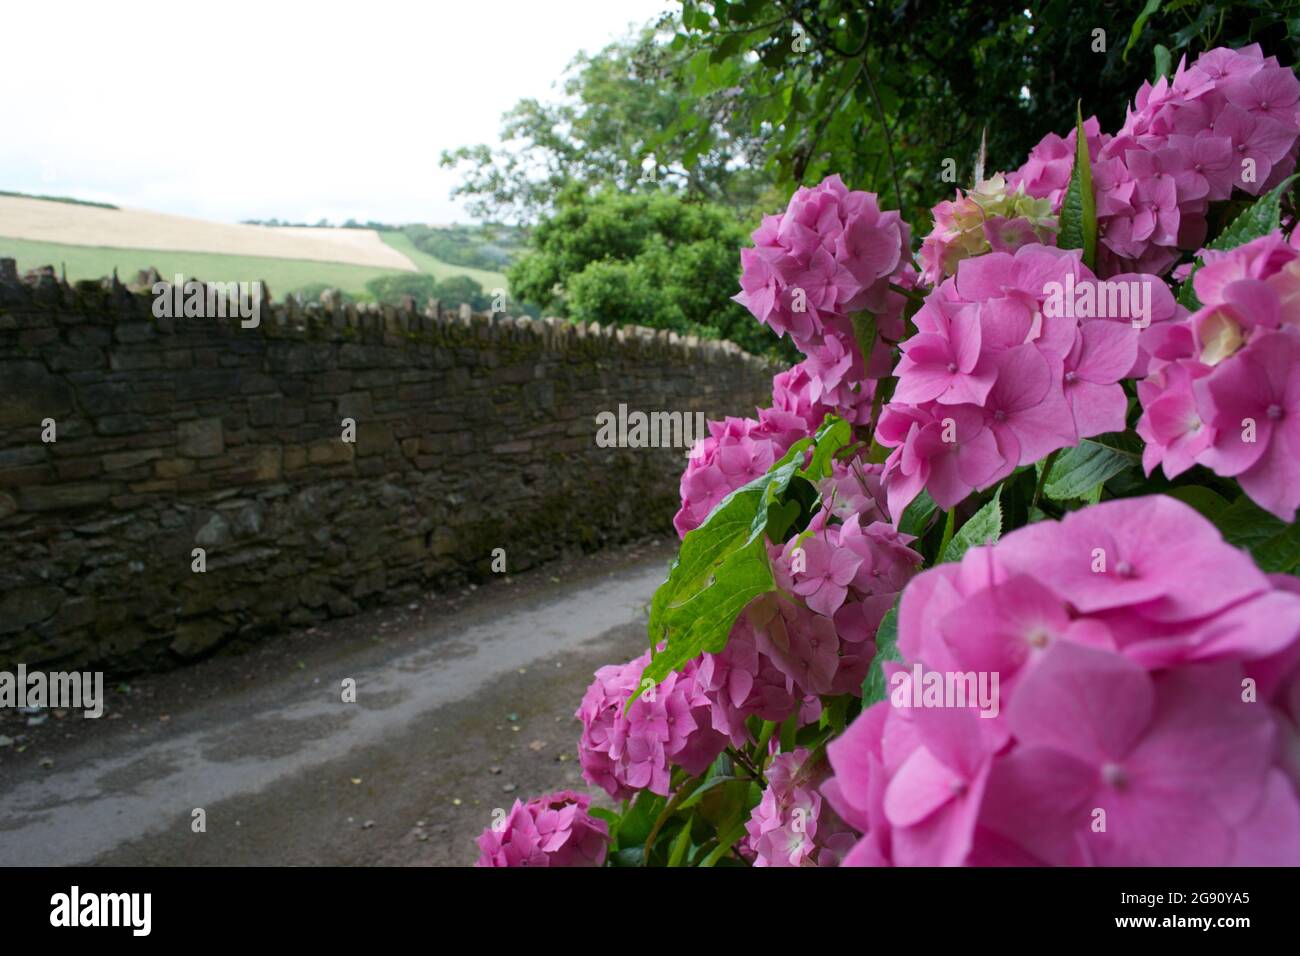 Pink Hydrangea on the side of a country lane, with a dry stone wall on the other side of the tarmac road and farmland, woods and hills in the distance Stock Photo